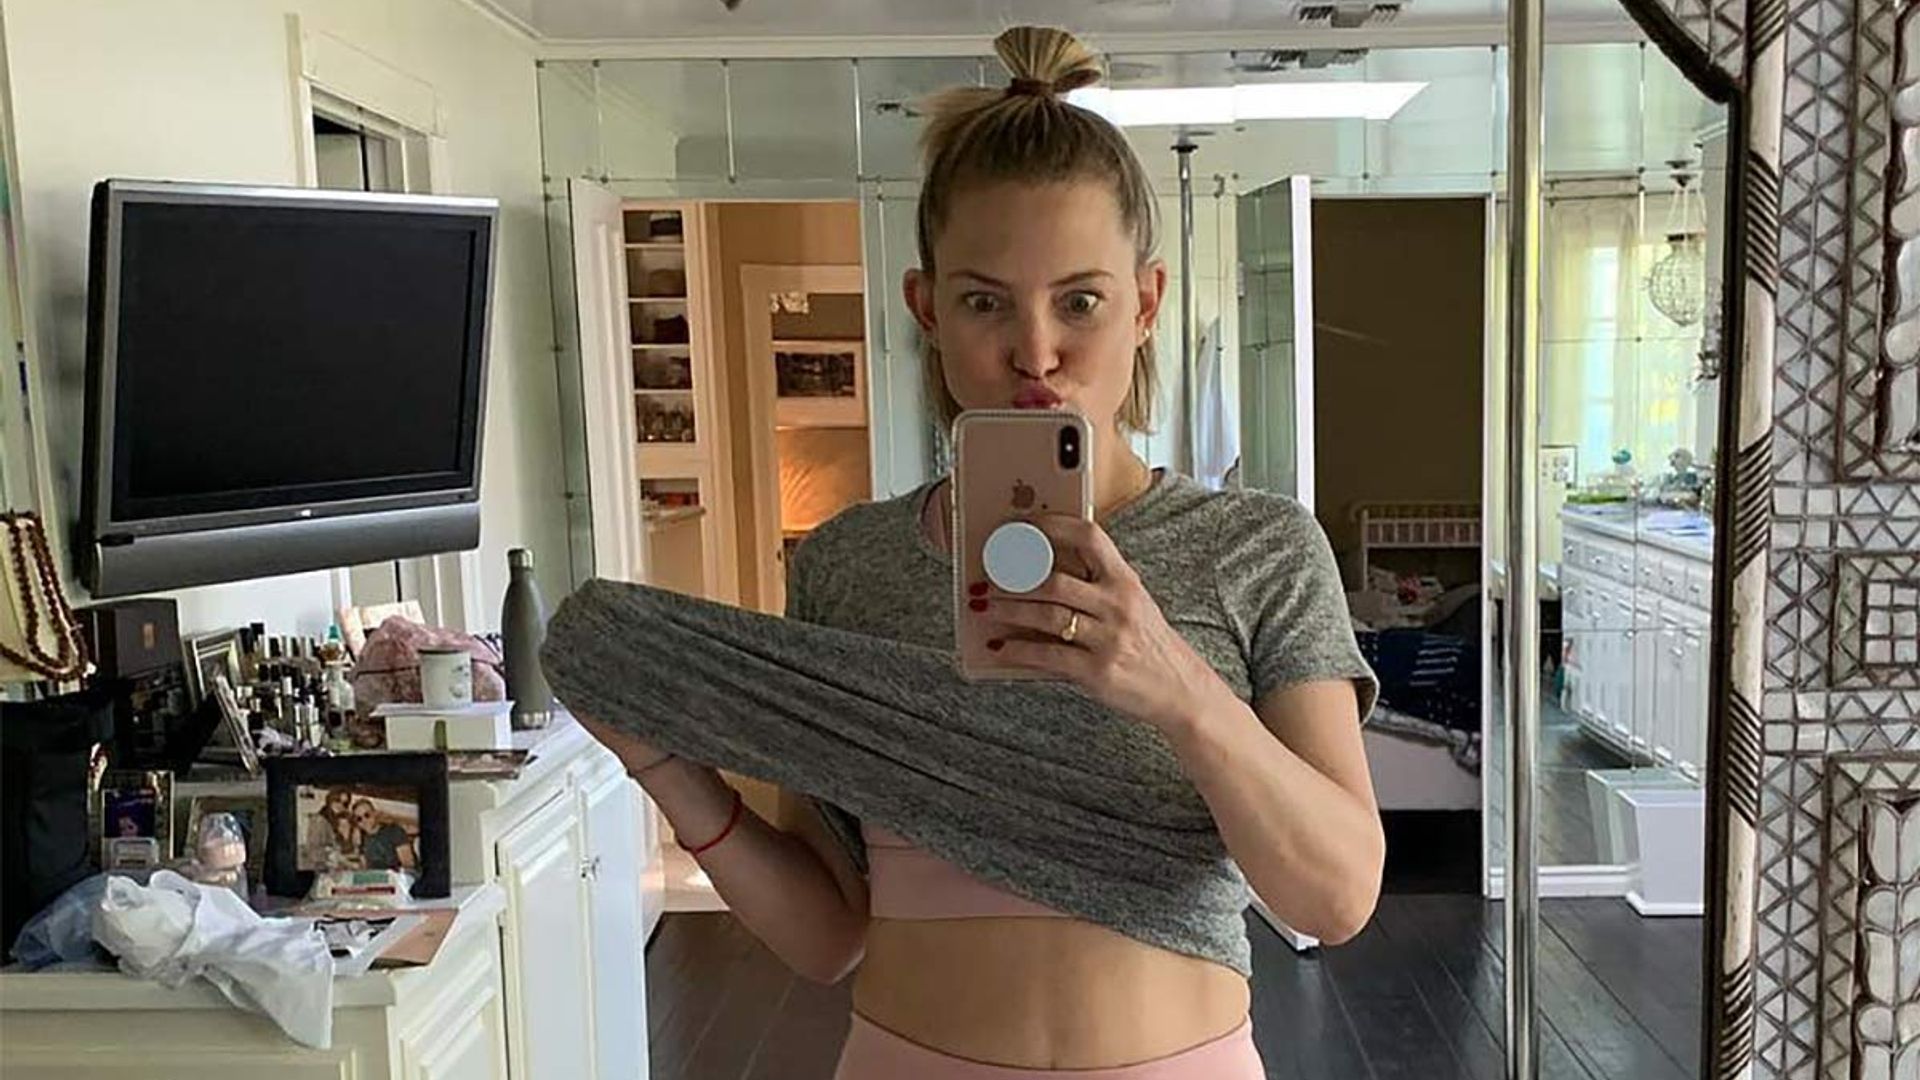 Kate Hudson Shares the Workout She Loves for Full-Body Results